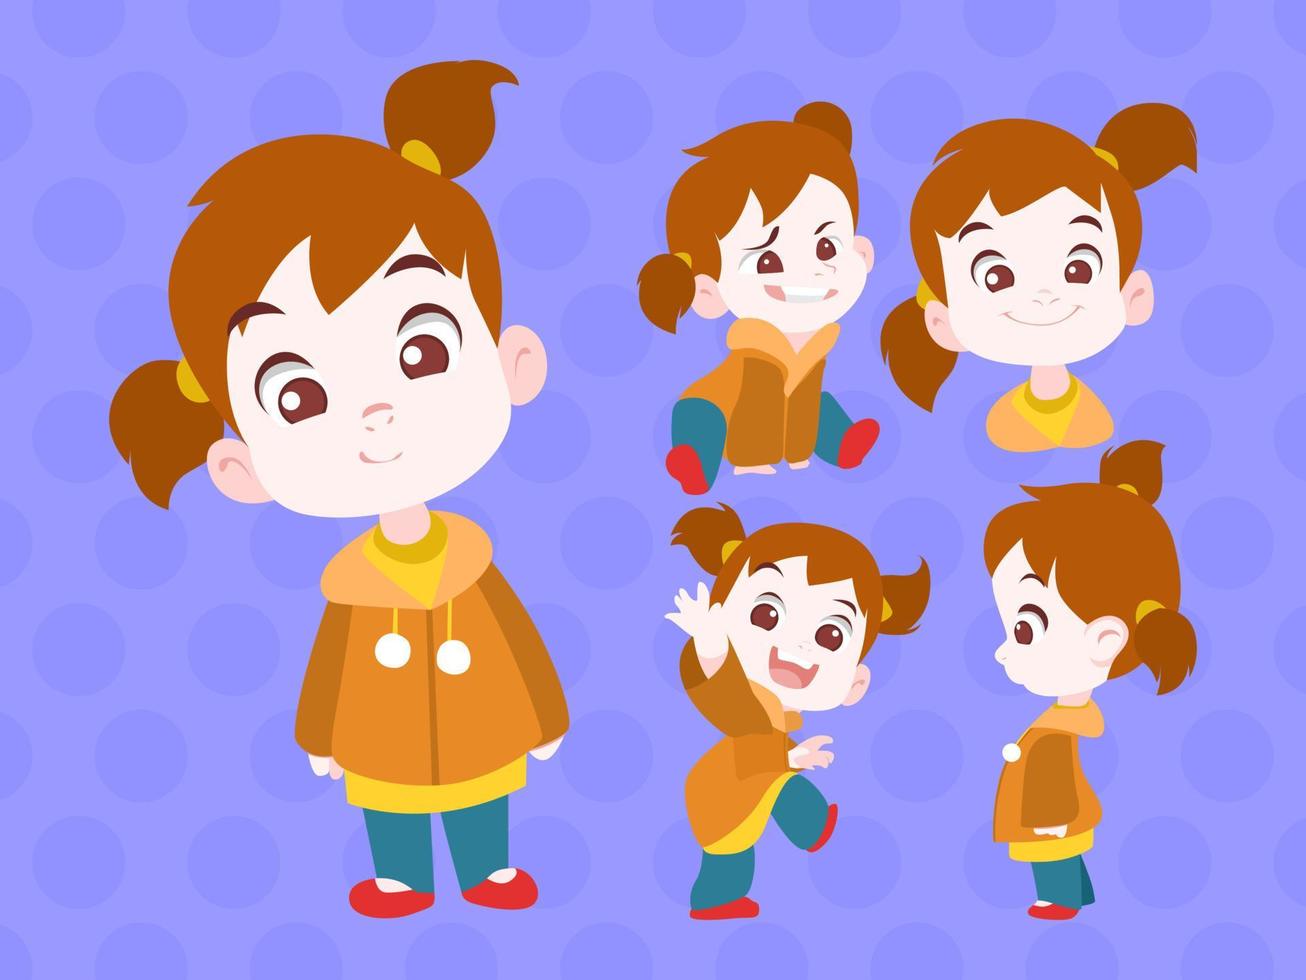 Cute Little Girl Expression Collection Vector Flat Design Illustration